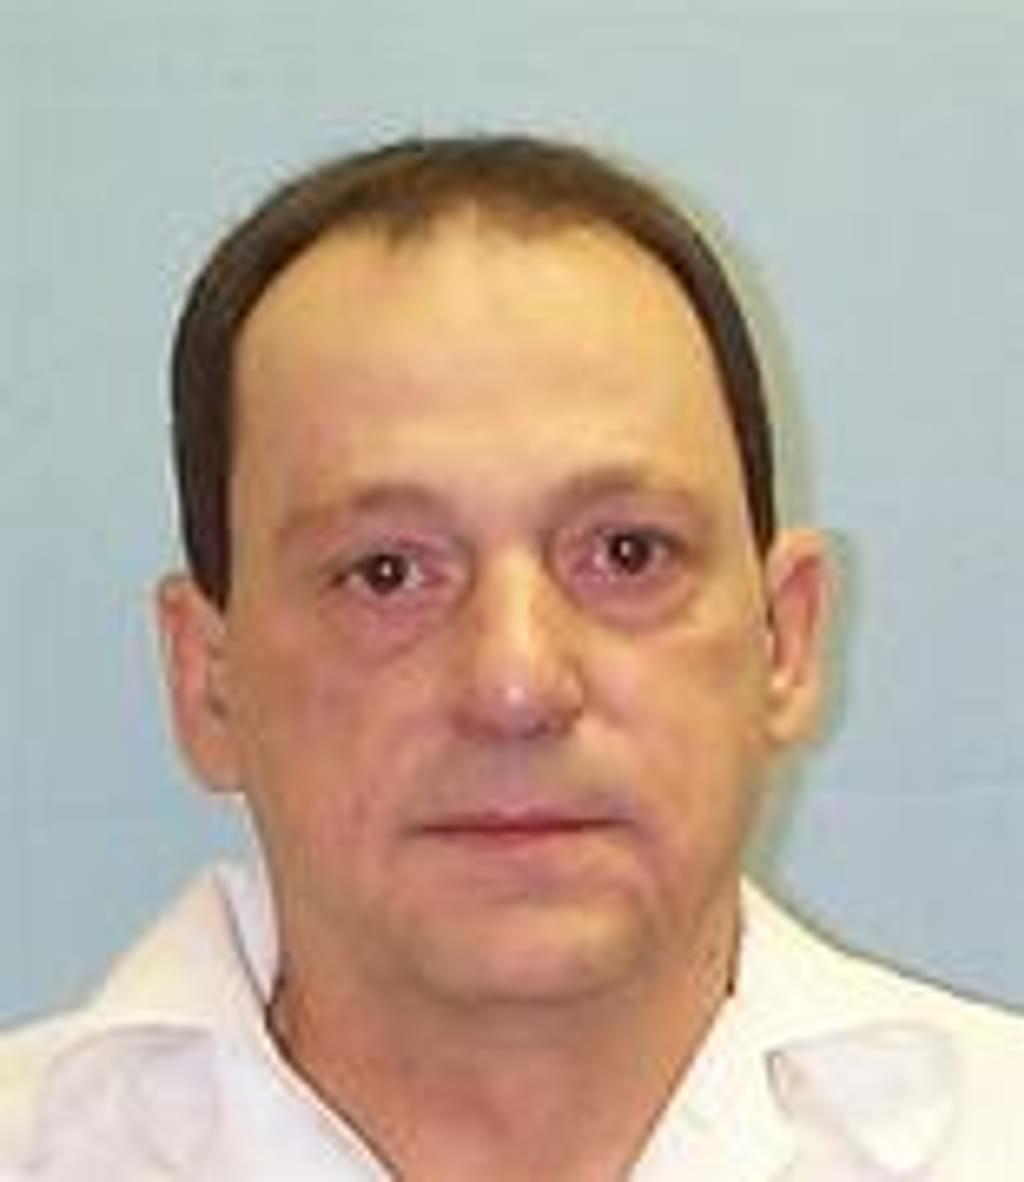 Alabama Inmate Dies on Death Row Before Federal Court Can Decide His Innocence Claim